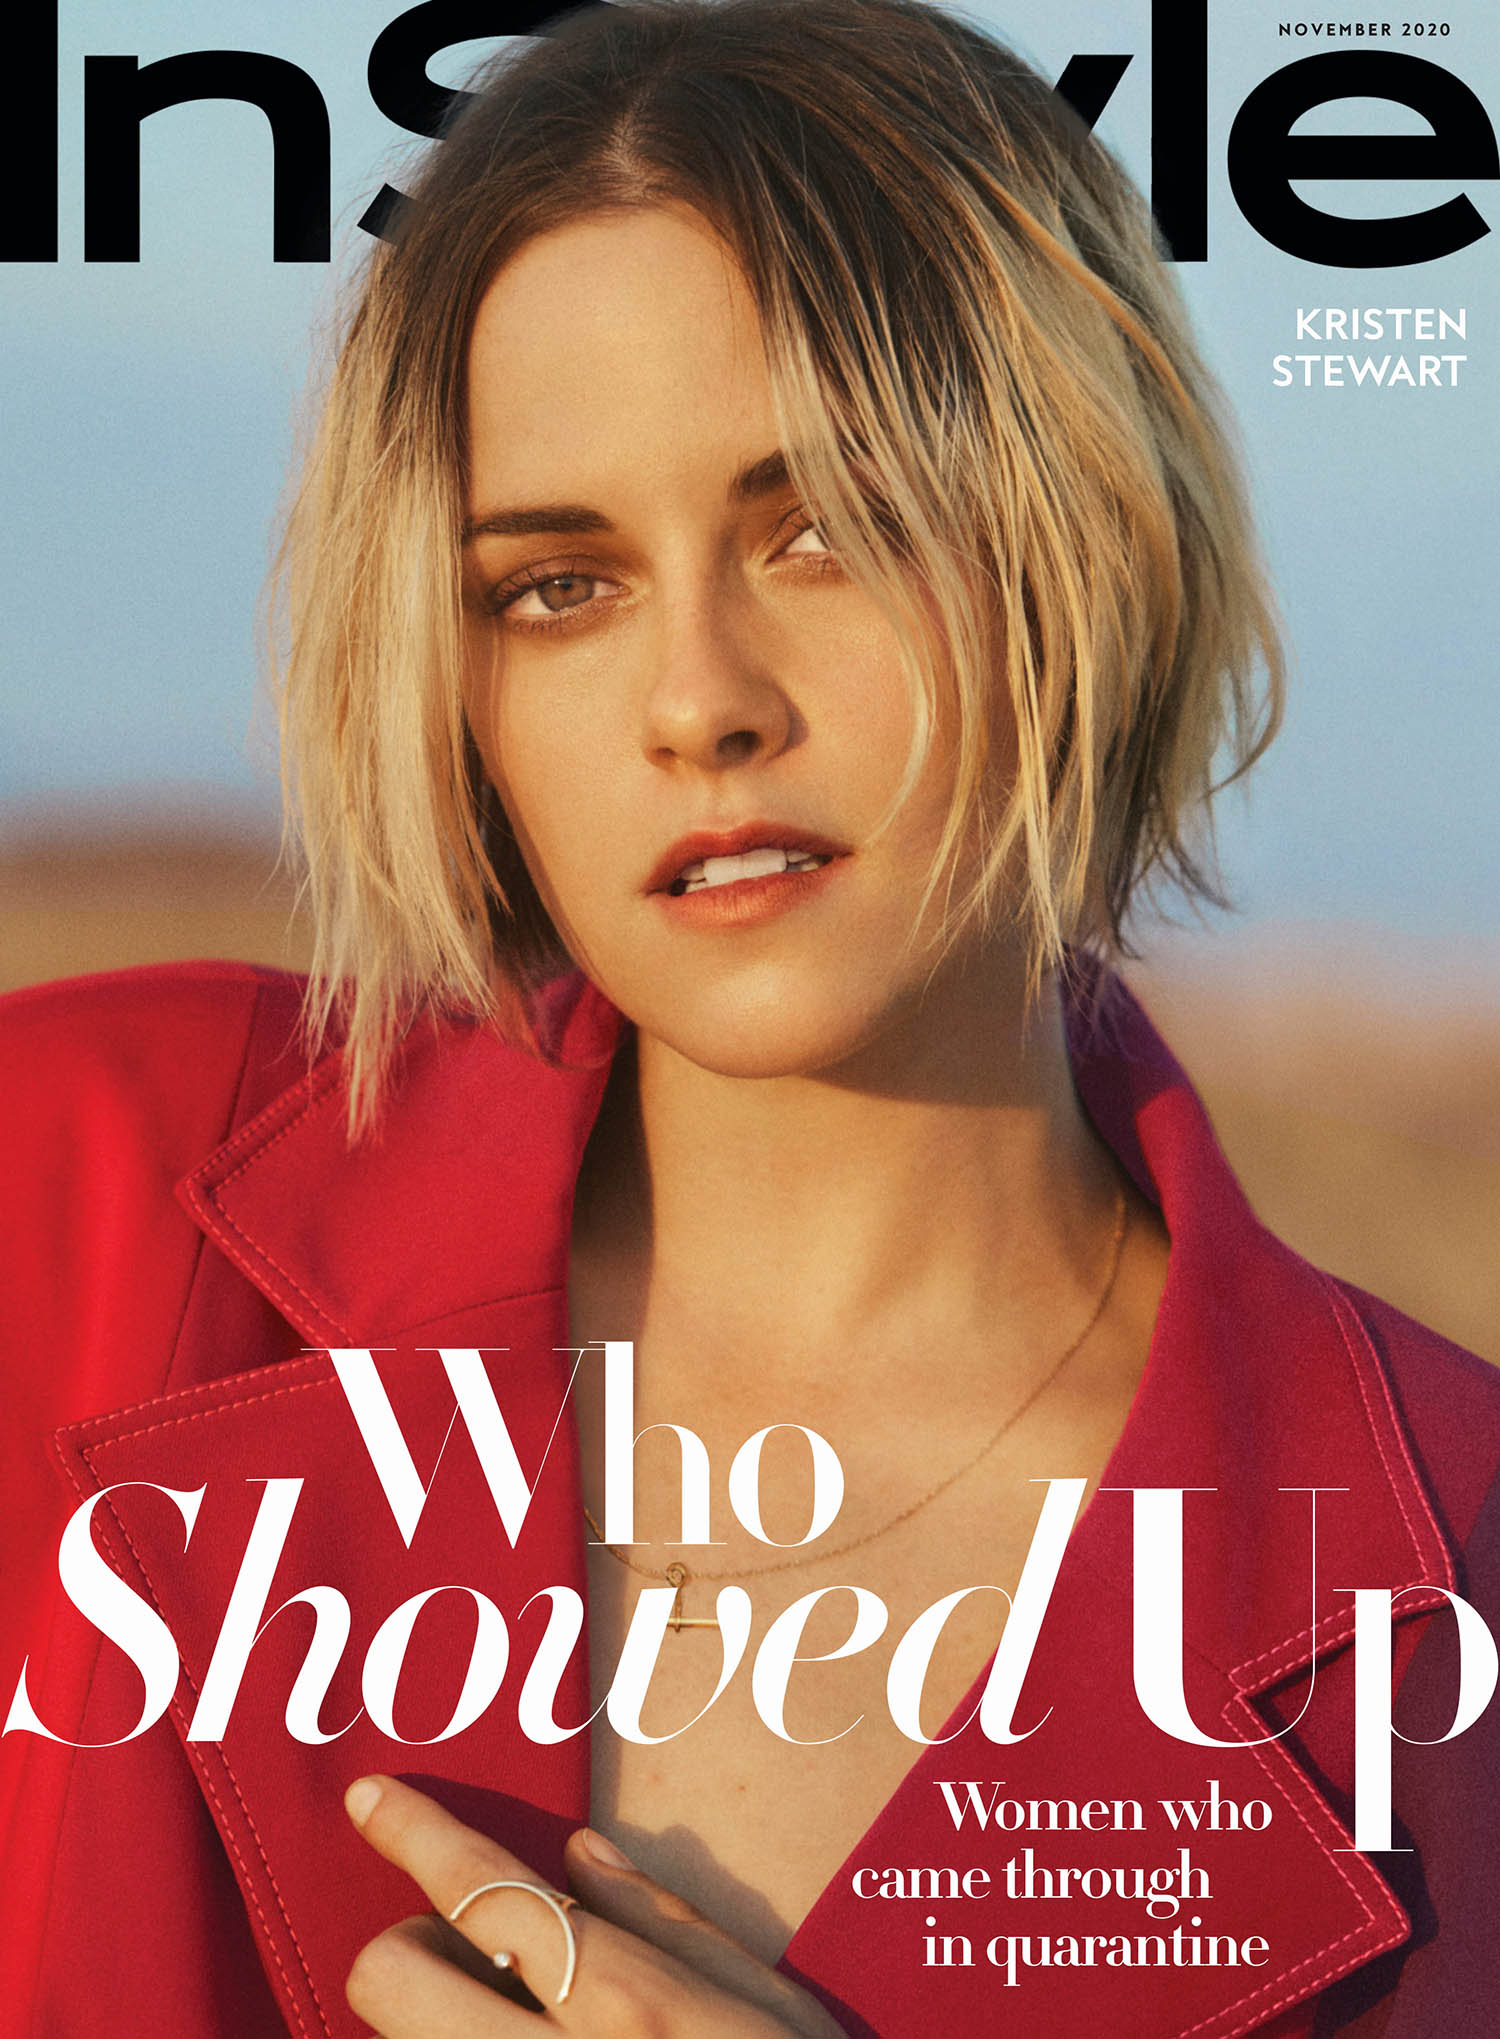 Kristen Stewart covers InStyle US November 2020 by Olivia Malone